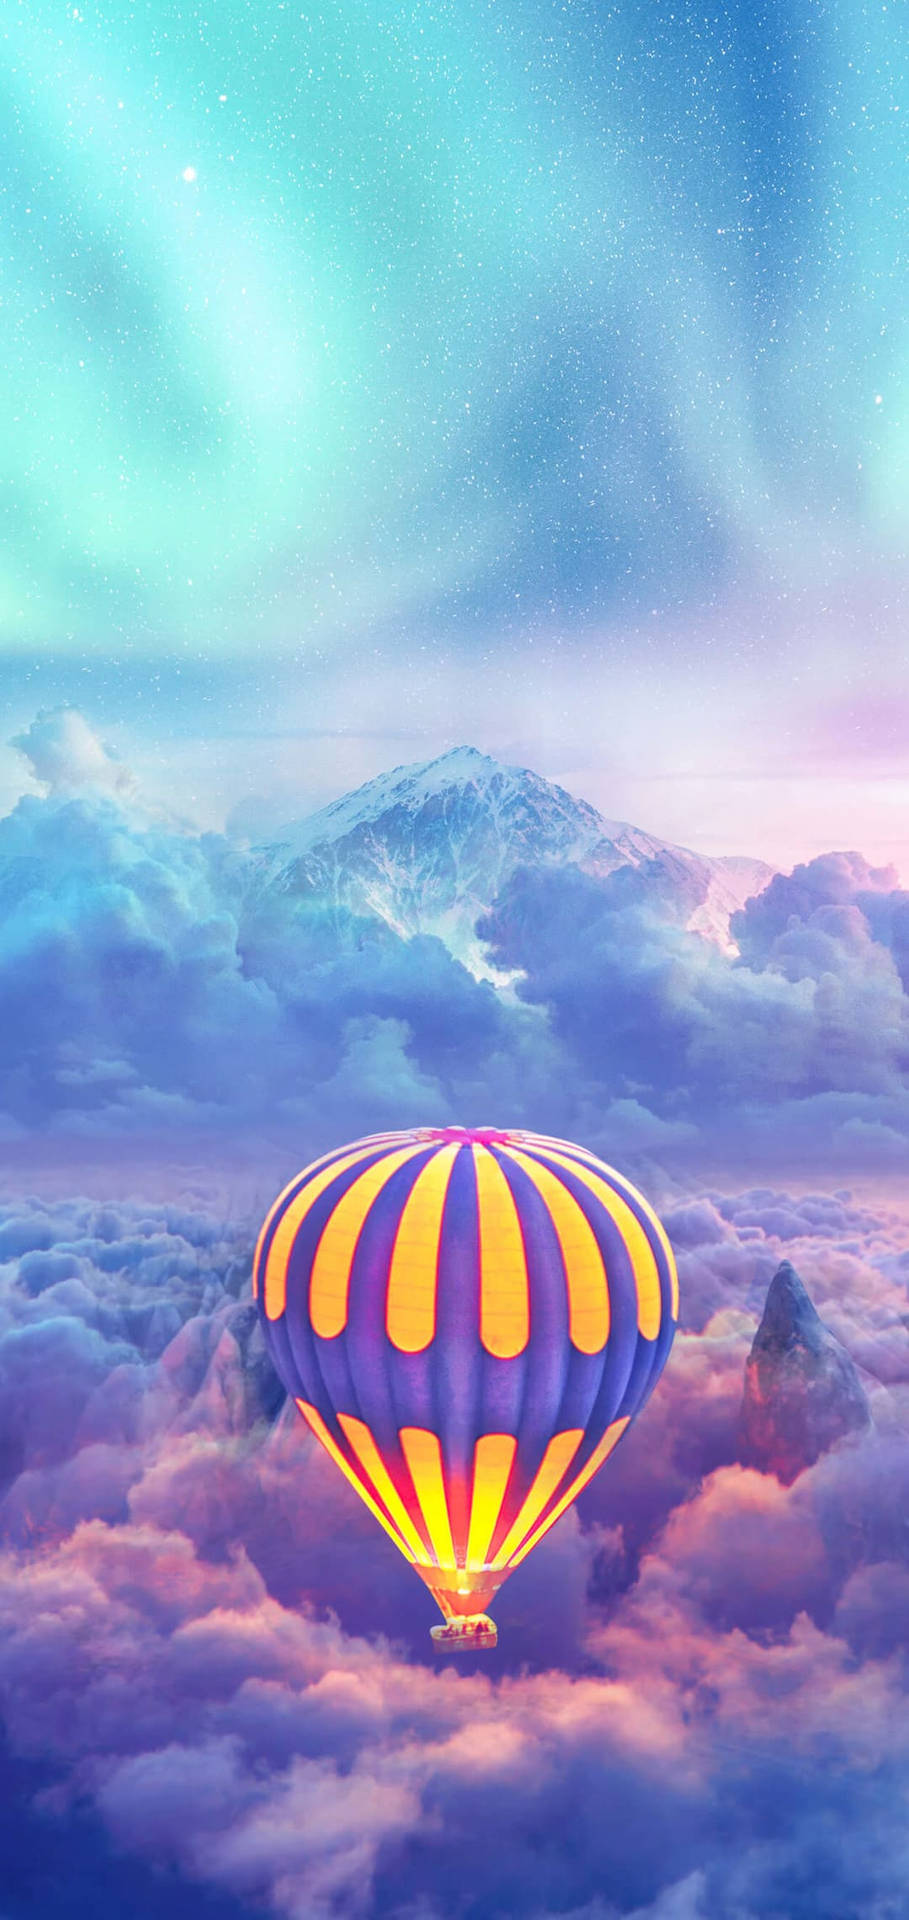 Coolest Parachute On Aesthetic Clouds Background